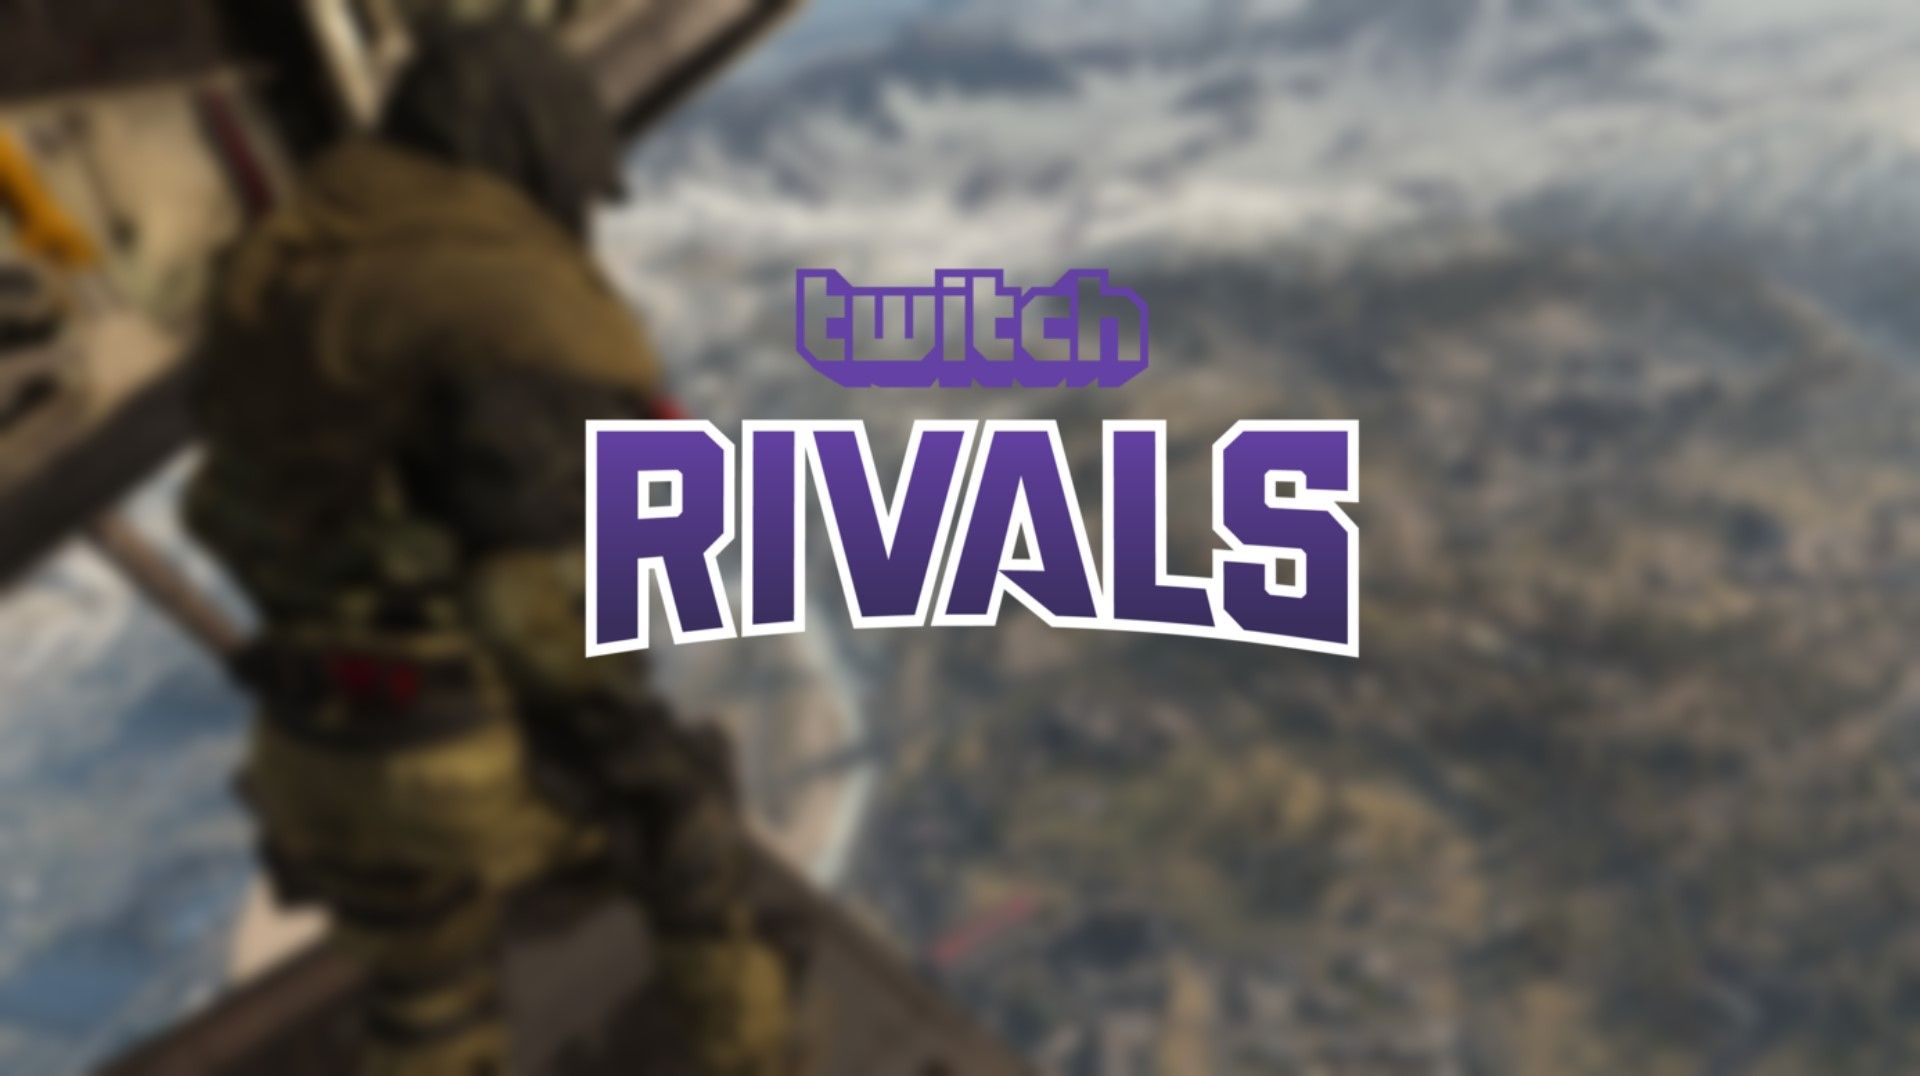 twitch rivals warzone